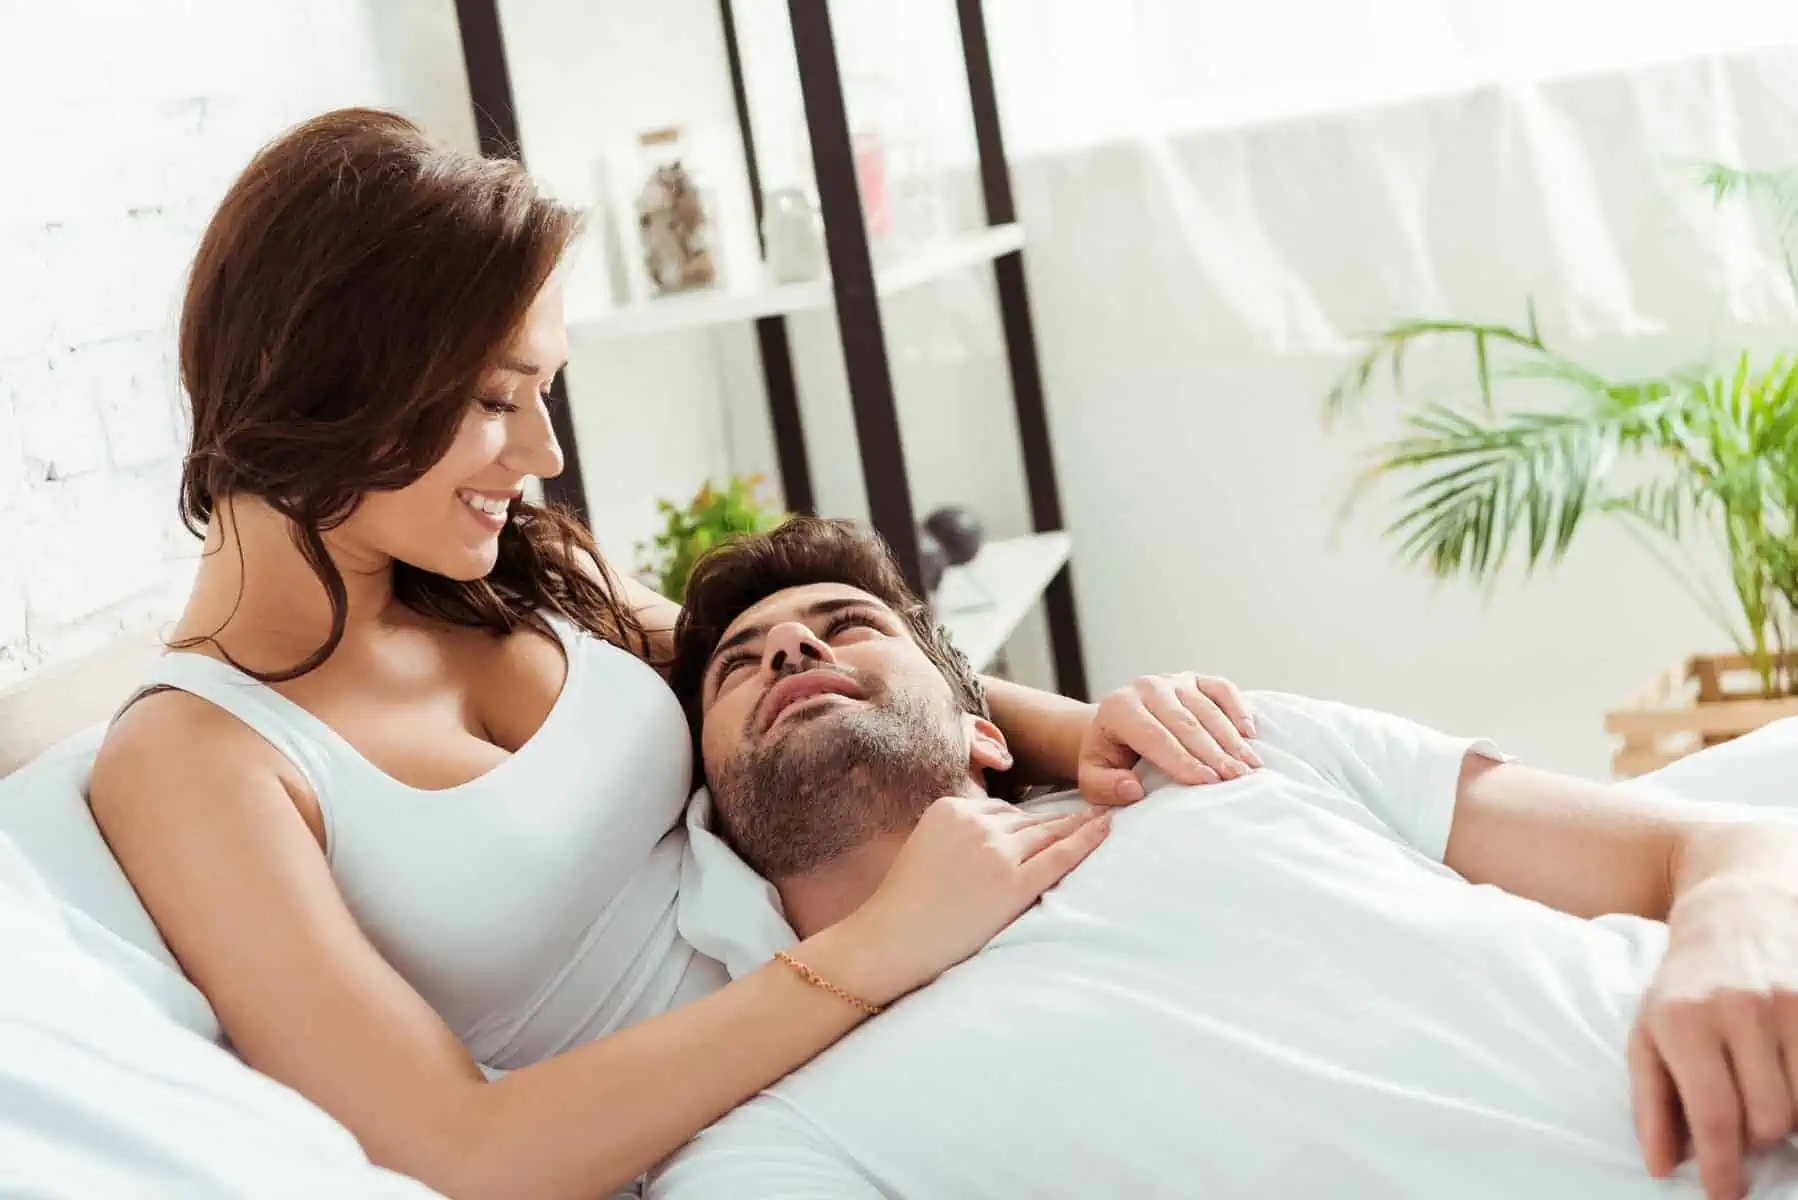 A man laying in bed next to a woman